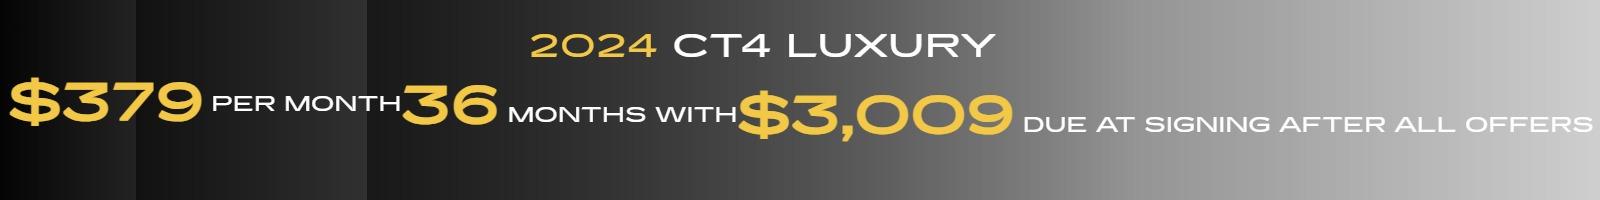 379 PER MONTH FOR 36 MONTHS ON CT4 LUXURY WITH 3009 DUE AT SIGNING AFTER ALL OFFERS